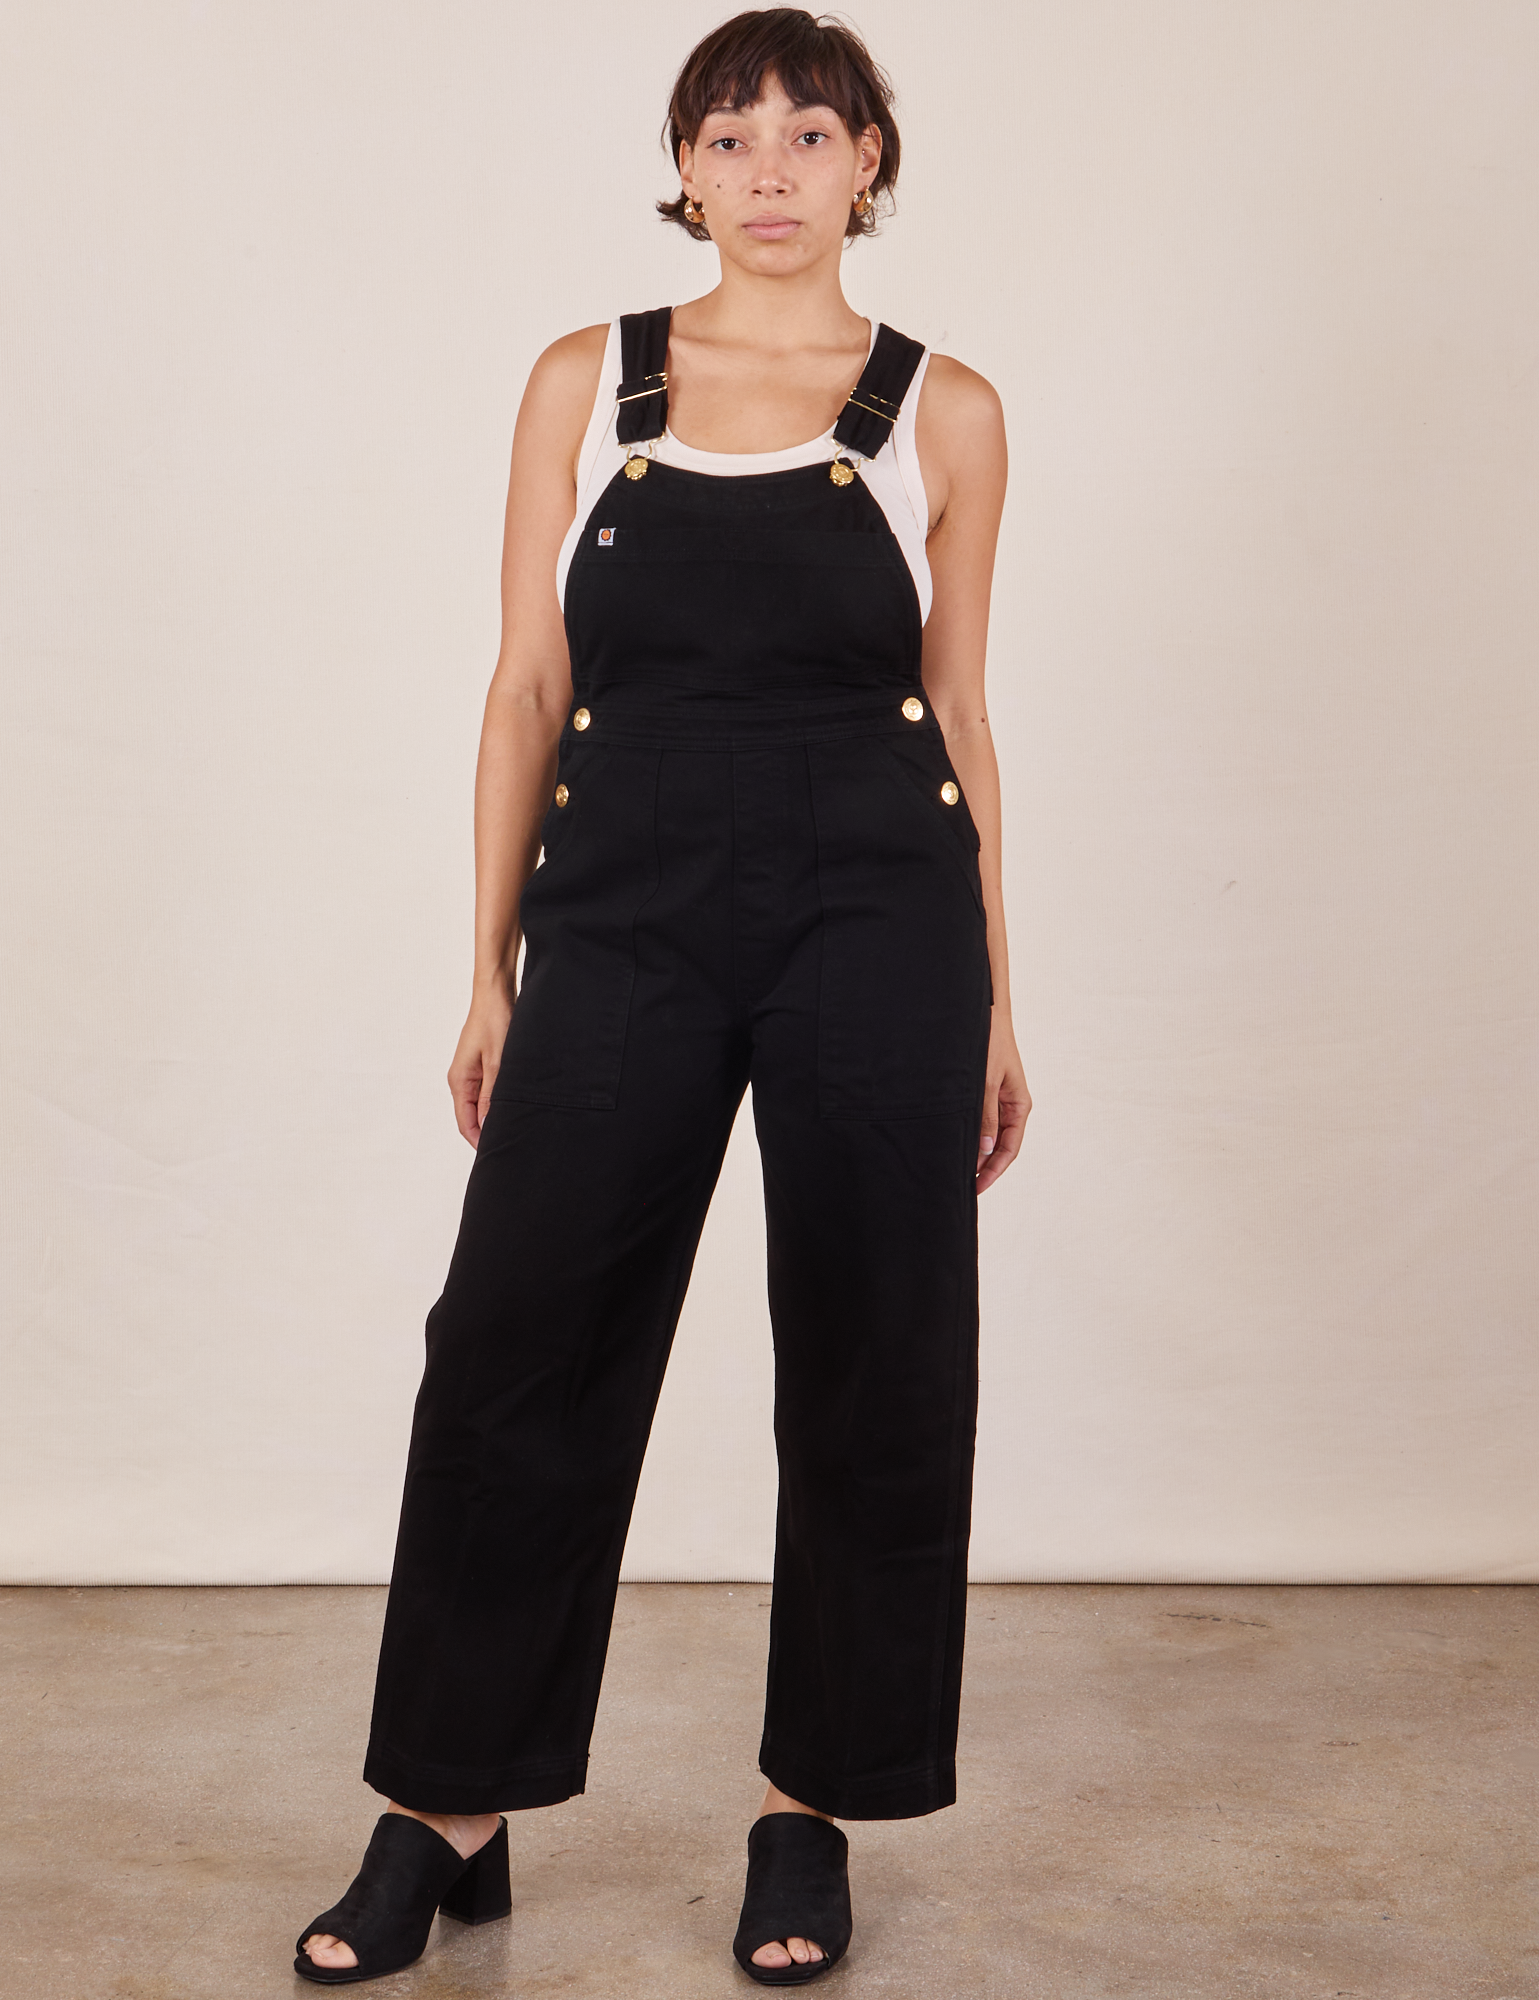 Tiara is 5'4" and wearing size XS Original Overalls in Mono Black with a Cropped Tank Top in vintage tee off-white  underneath.